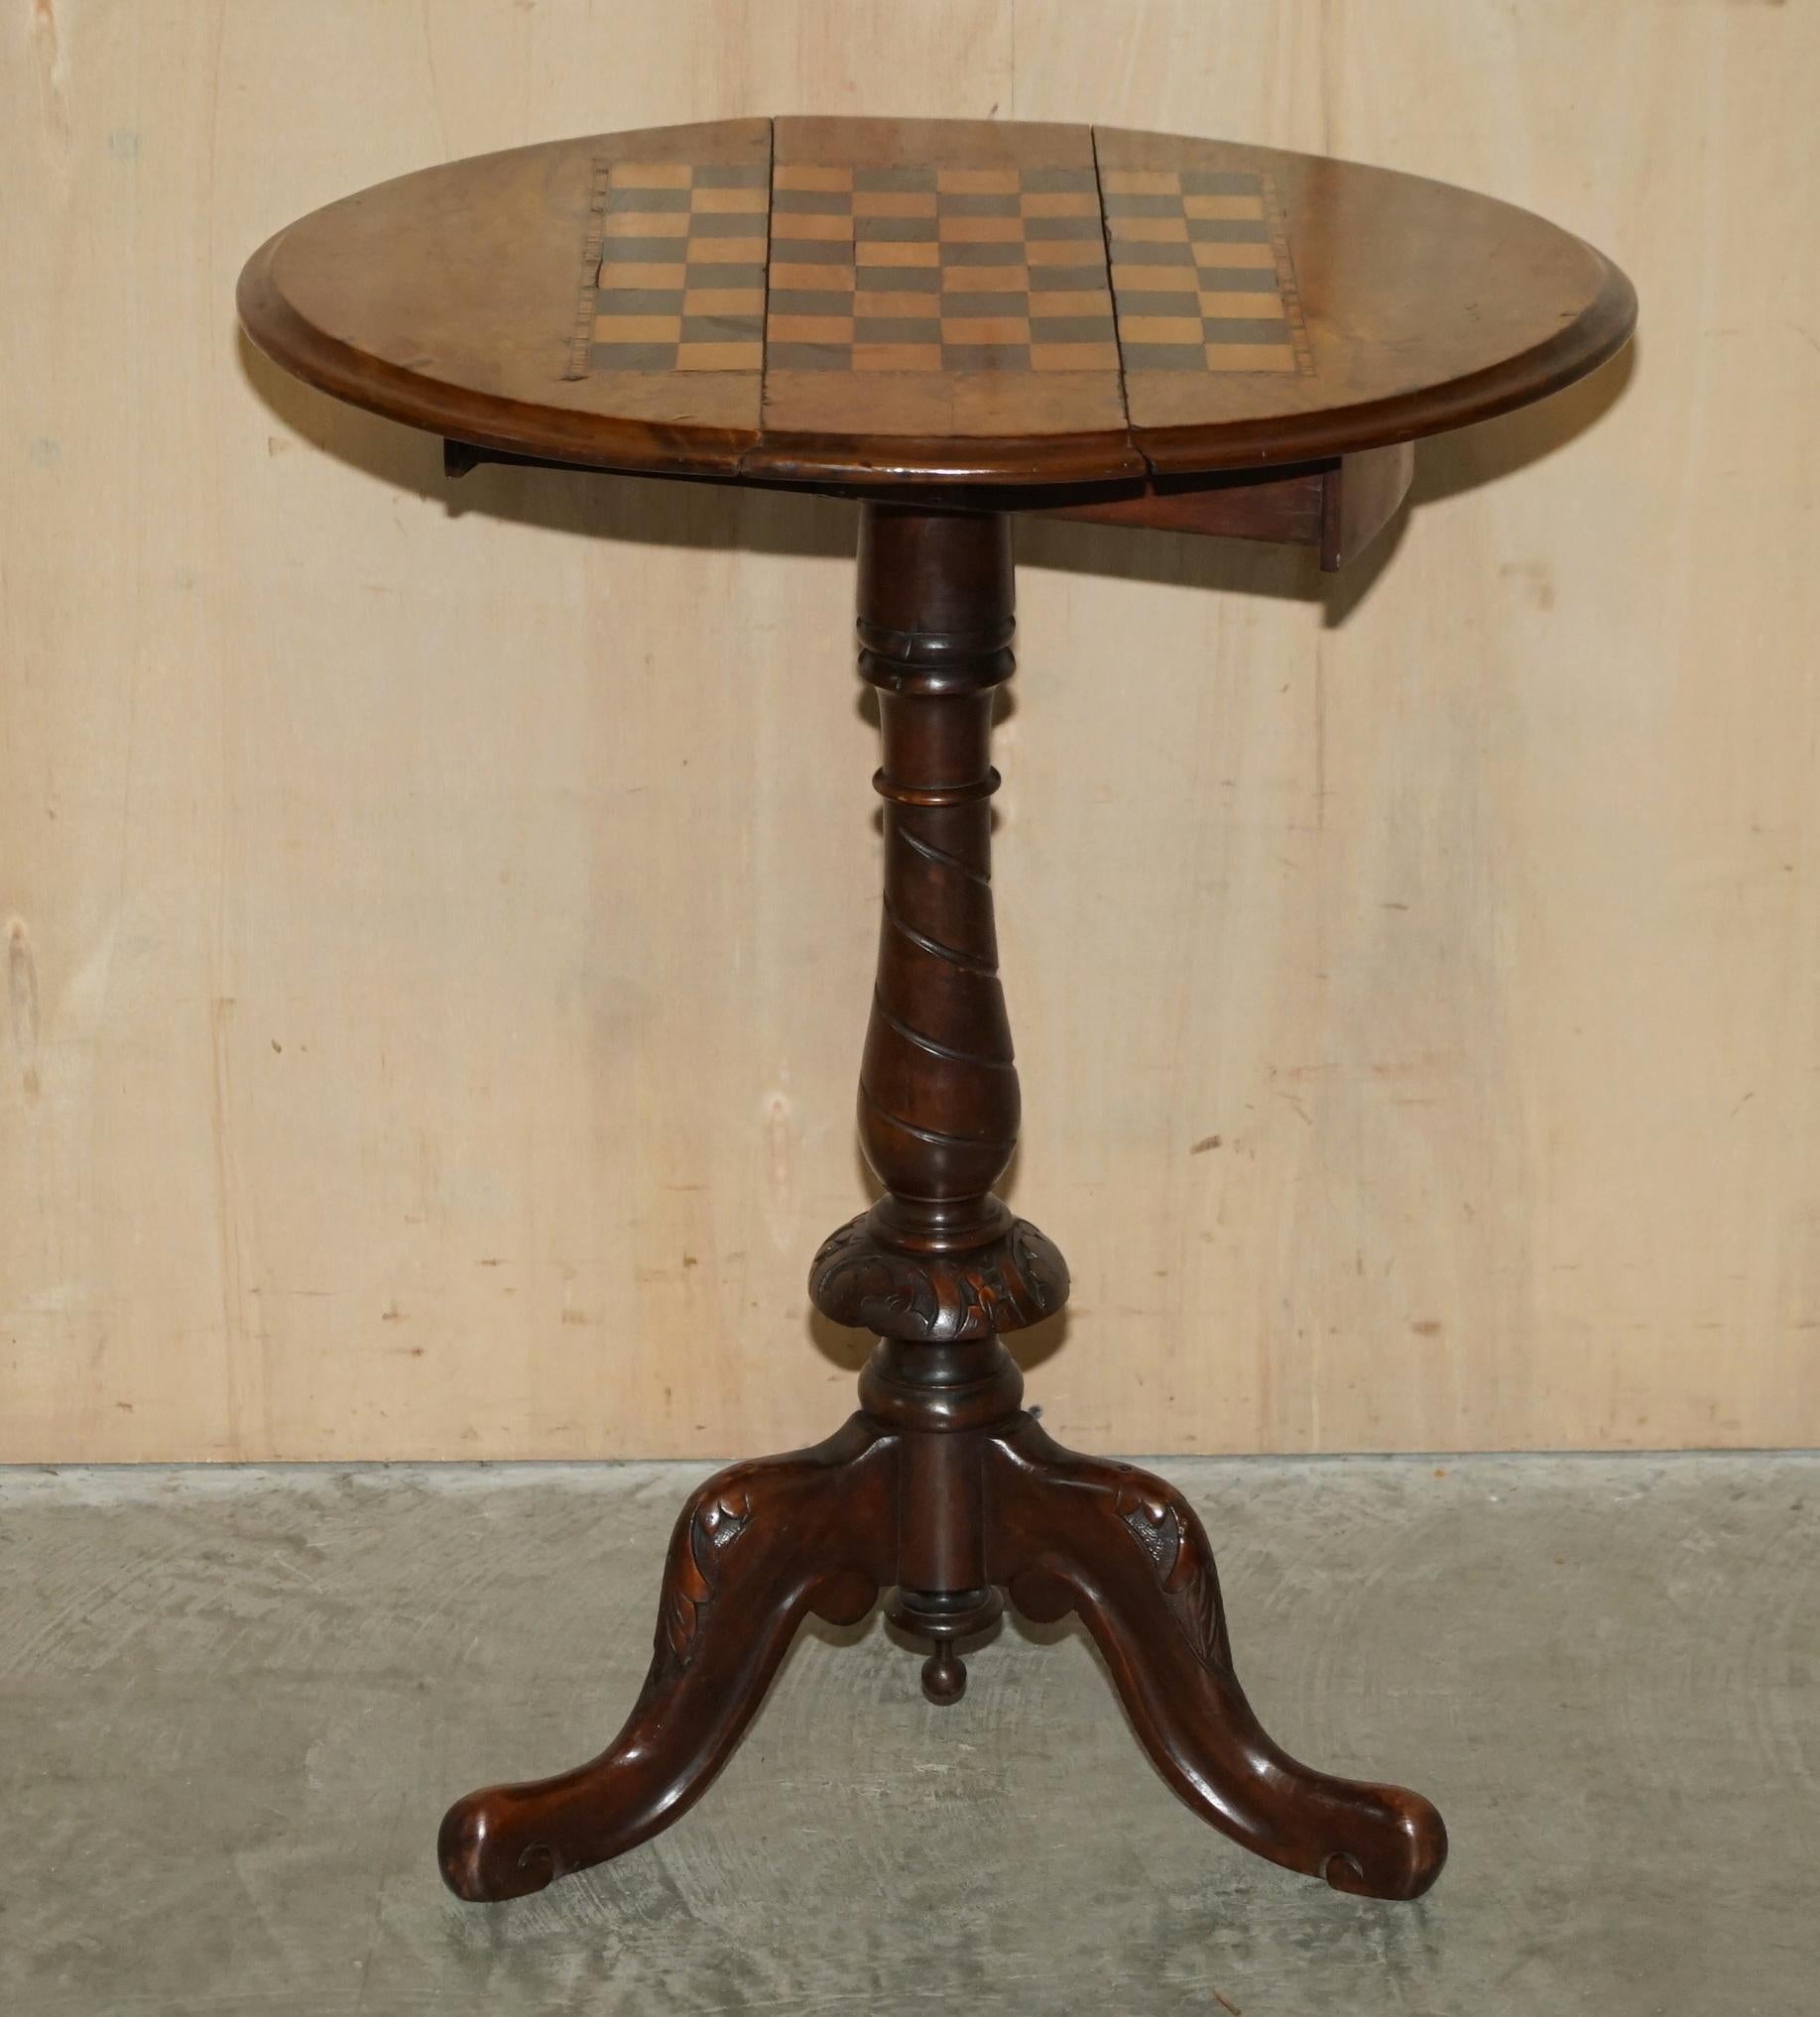 Early 20th Century Stunning Antique Burr Walnut Folding Chess Board Table Staunton Chess Pieces Set